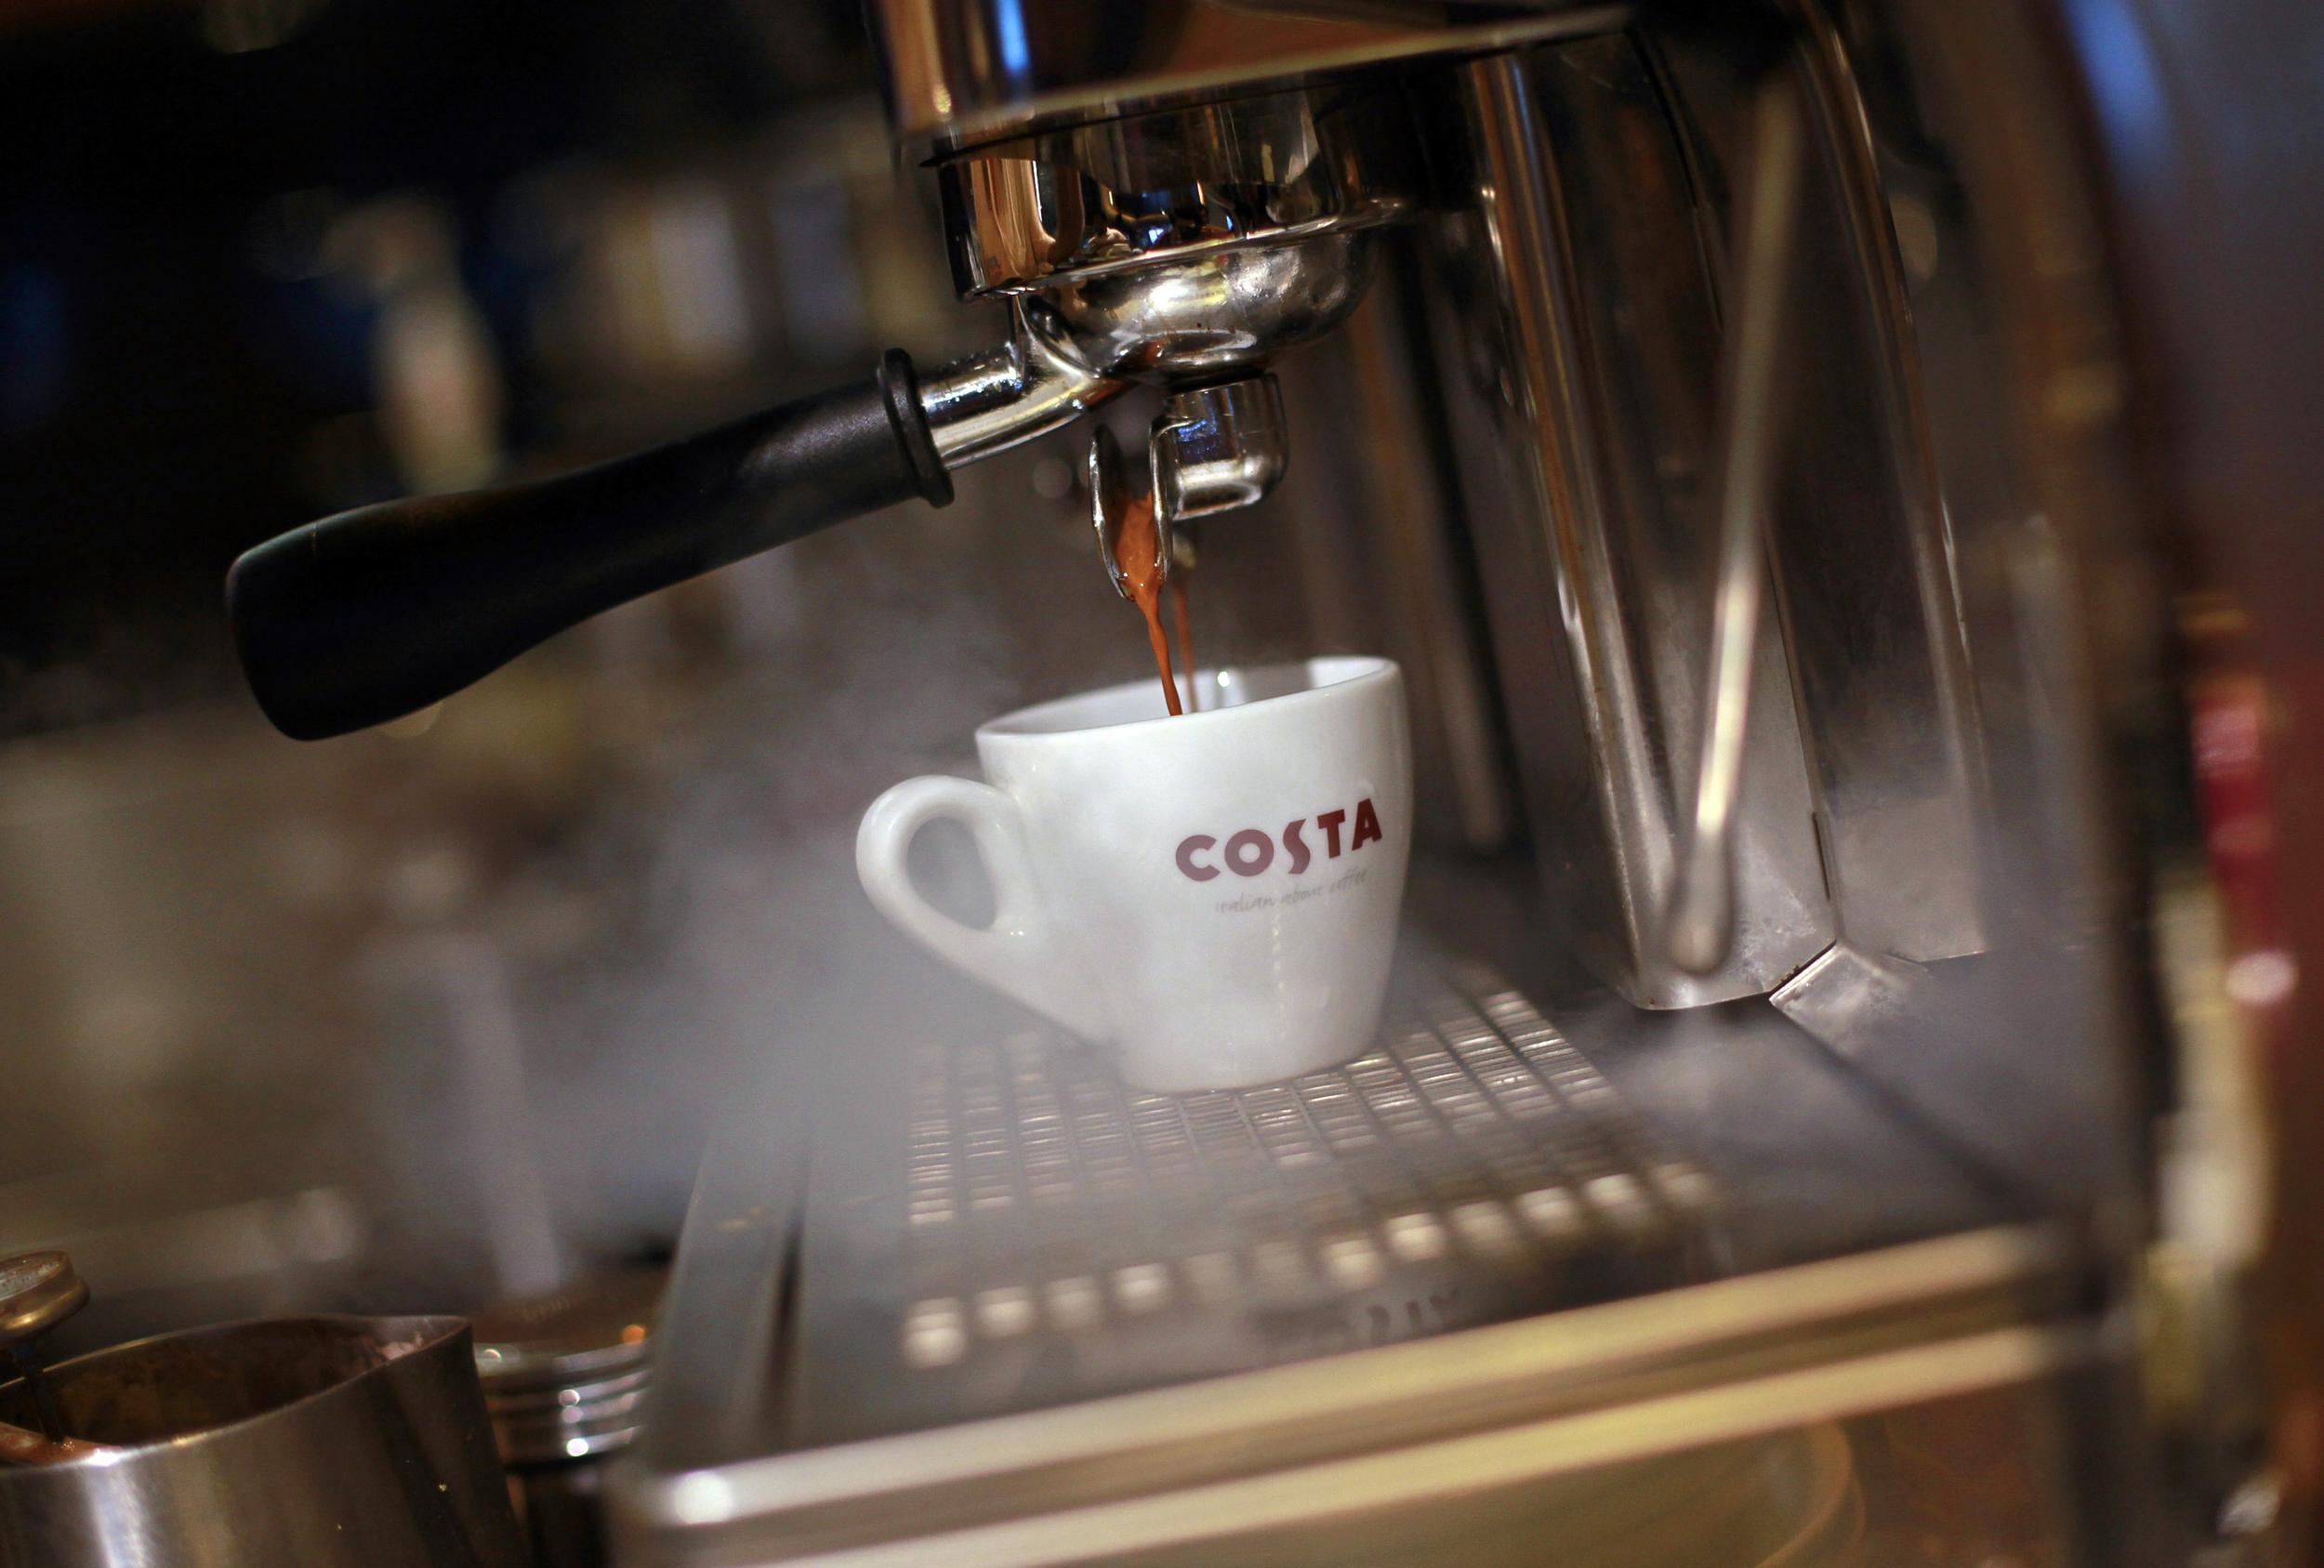 The coffee chain will be split off from the Premier Inn brand within two years